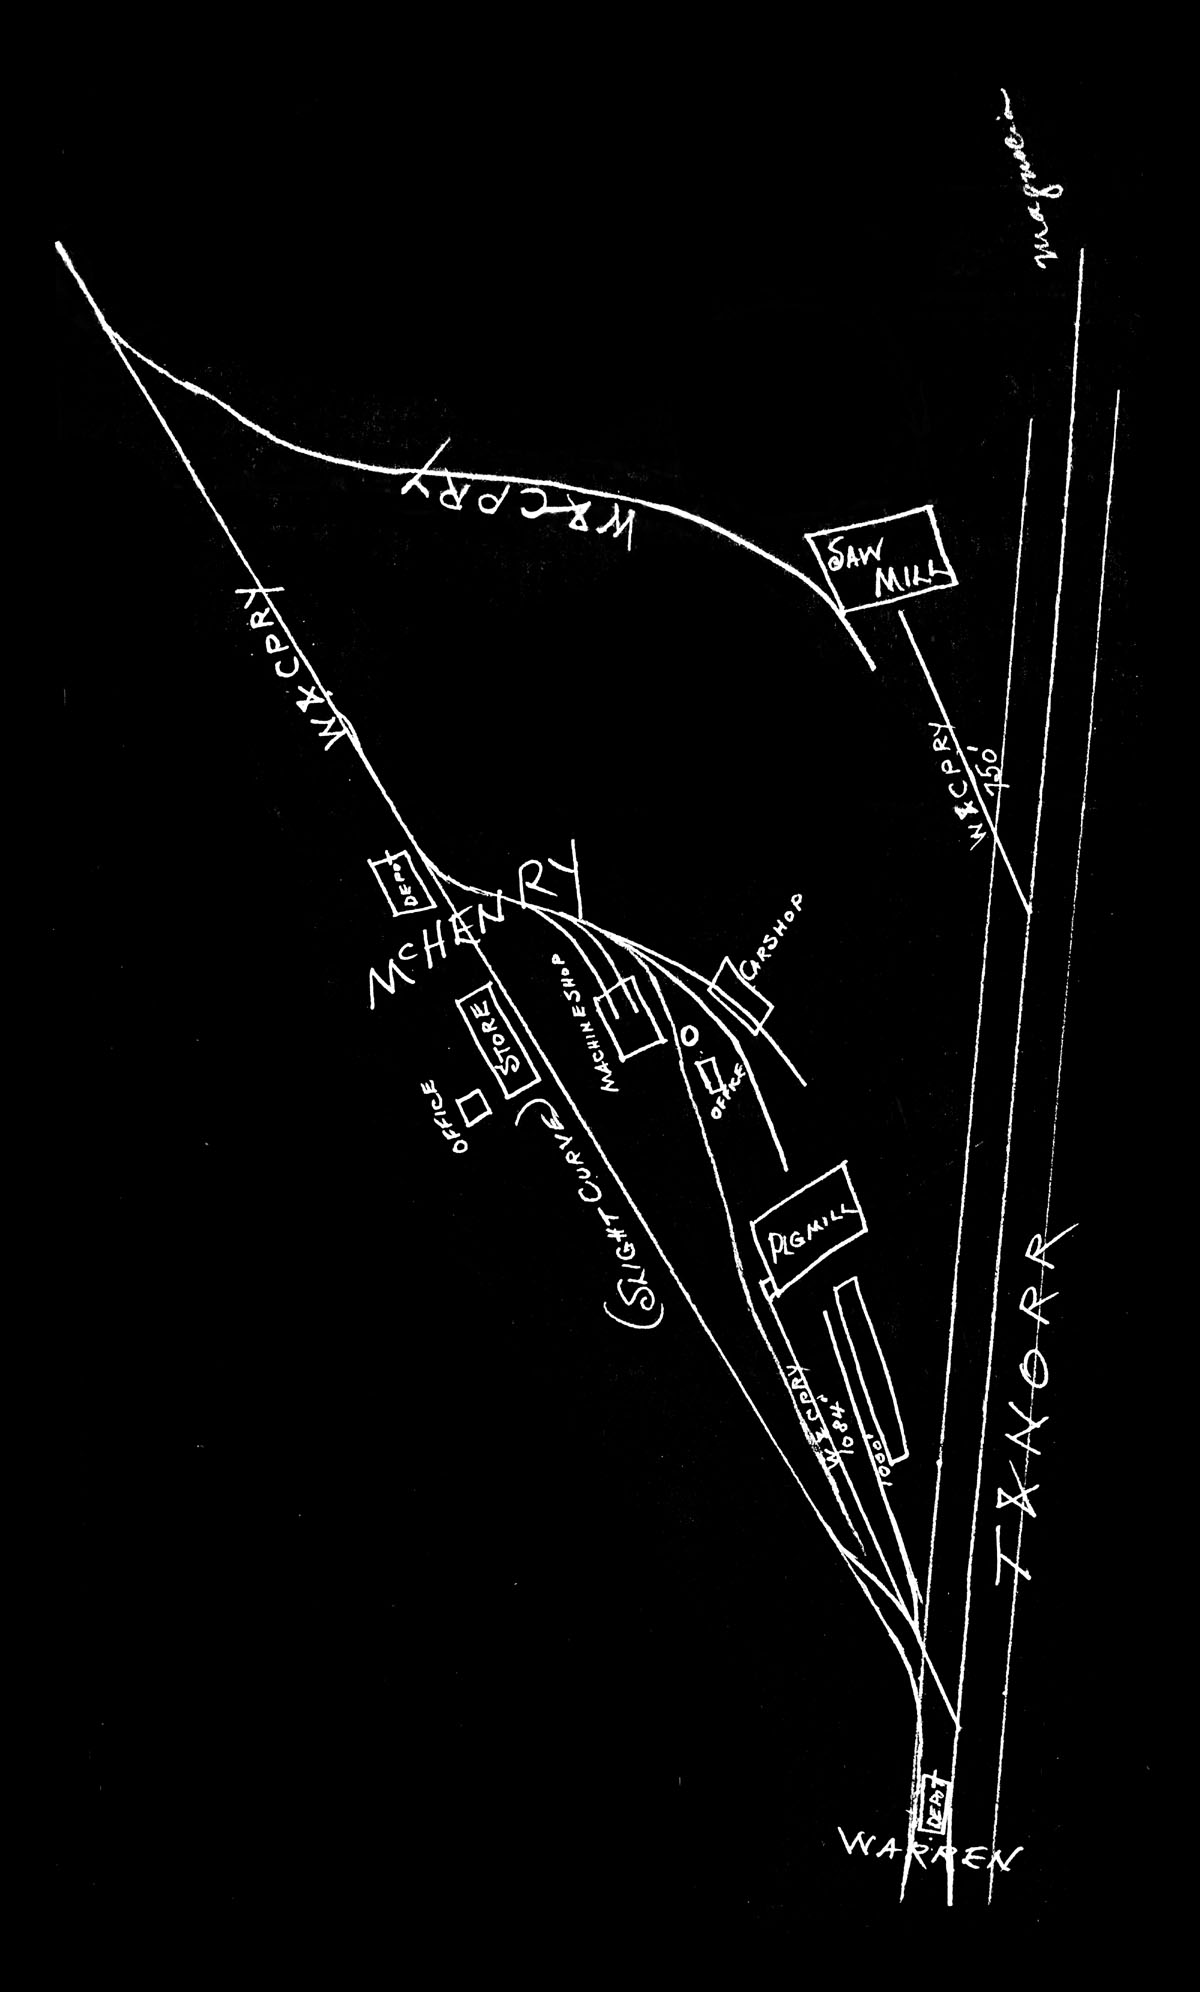 Warren & Corsicana Pacific Railway Company (Tex.), Map Showing Mill Layout and Industrial Tracks at "McHenry" (on the edge of Warren) in 1901.